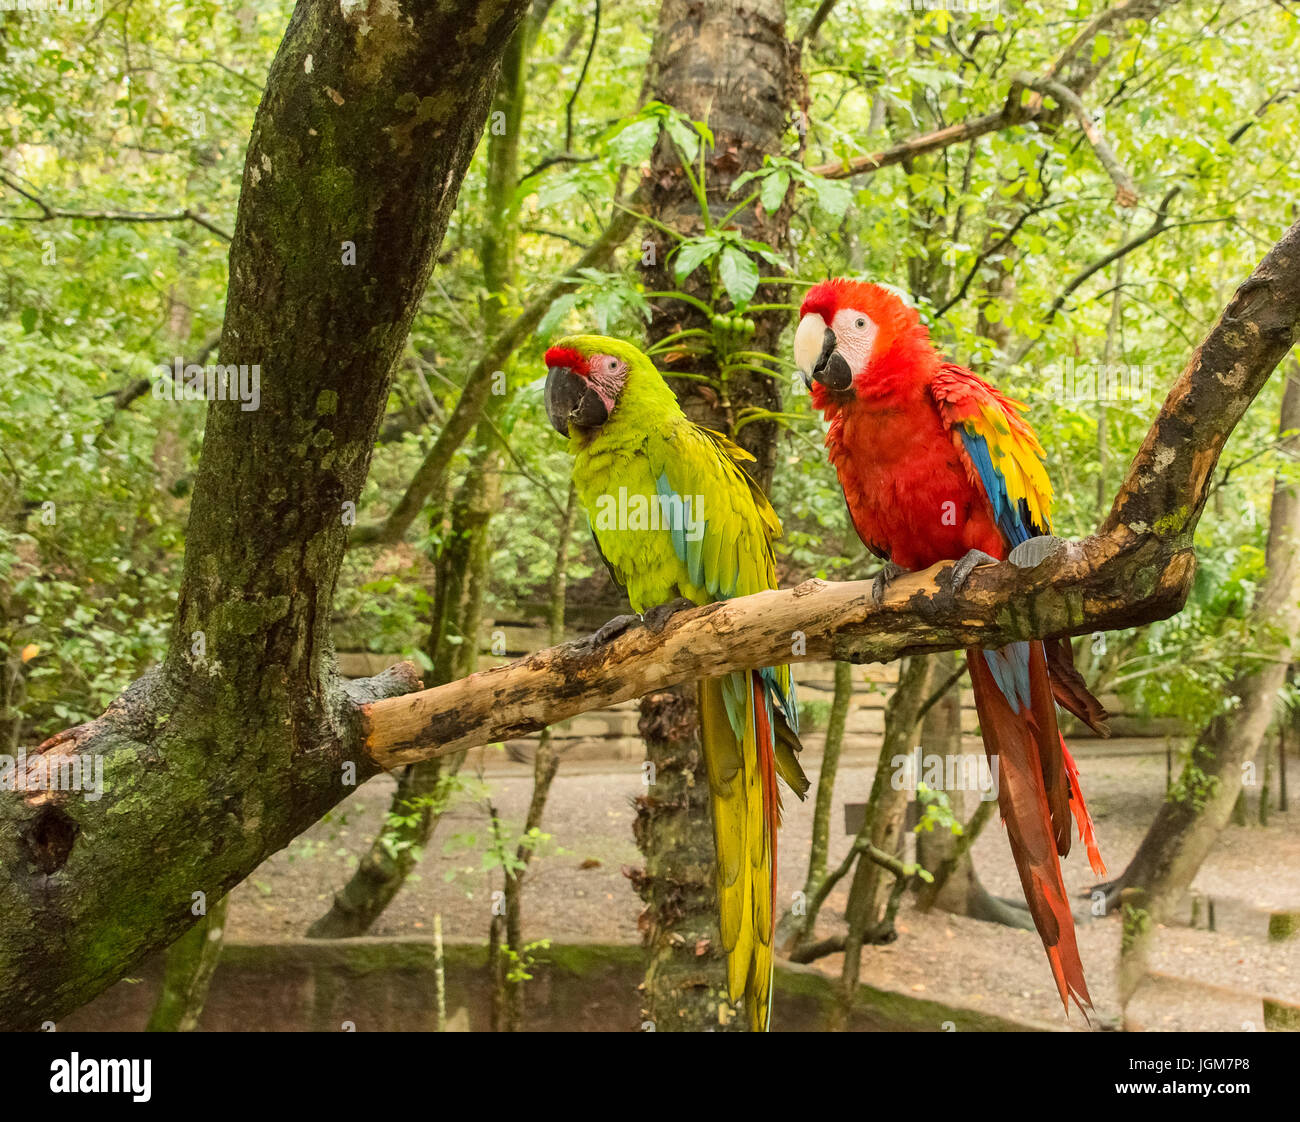 Colorful Macaw Bird In The Wild Stock Photo